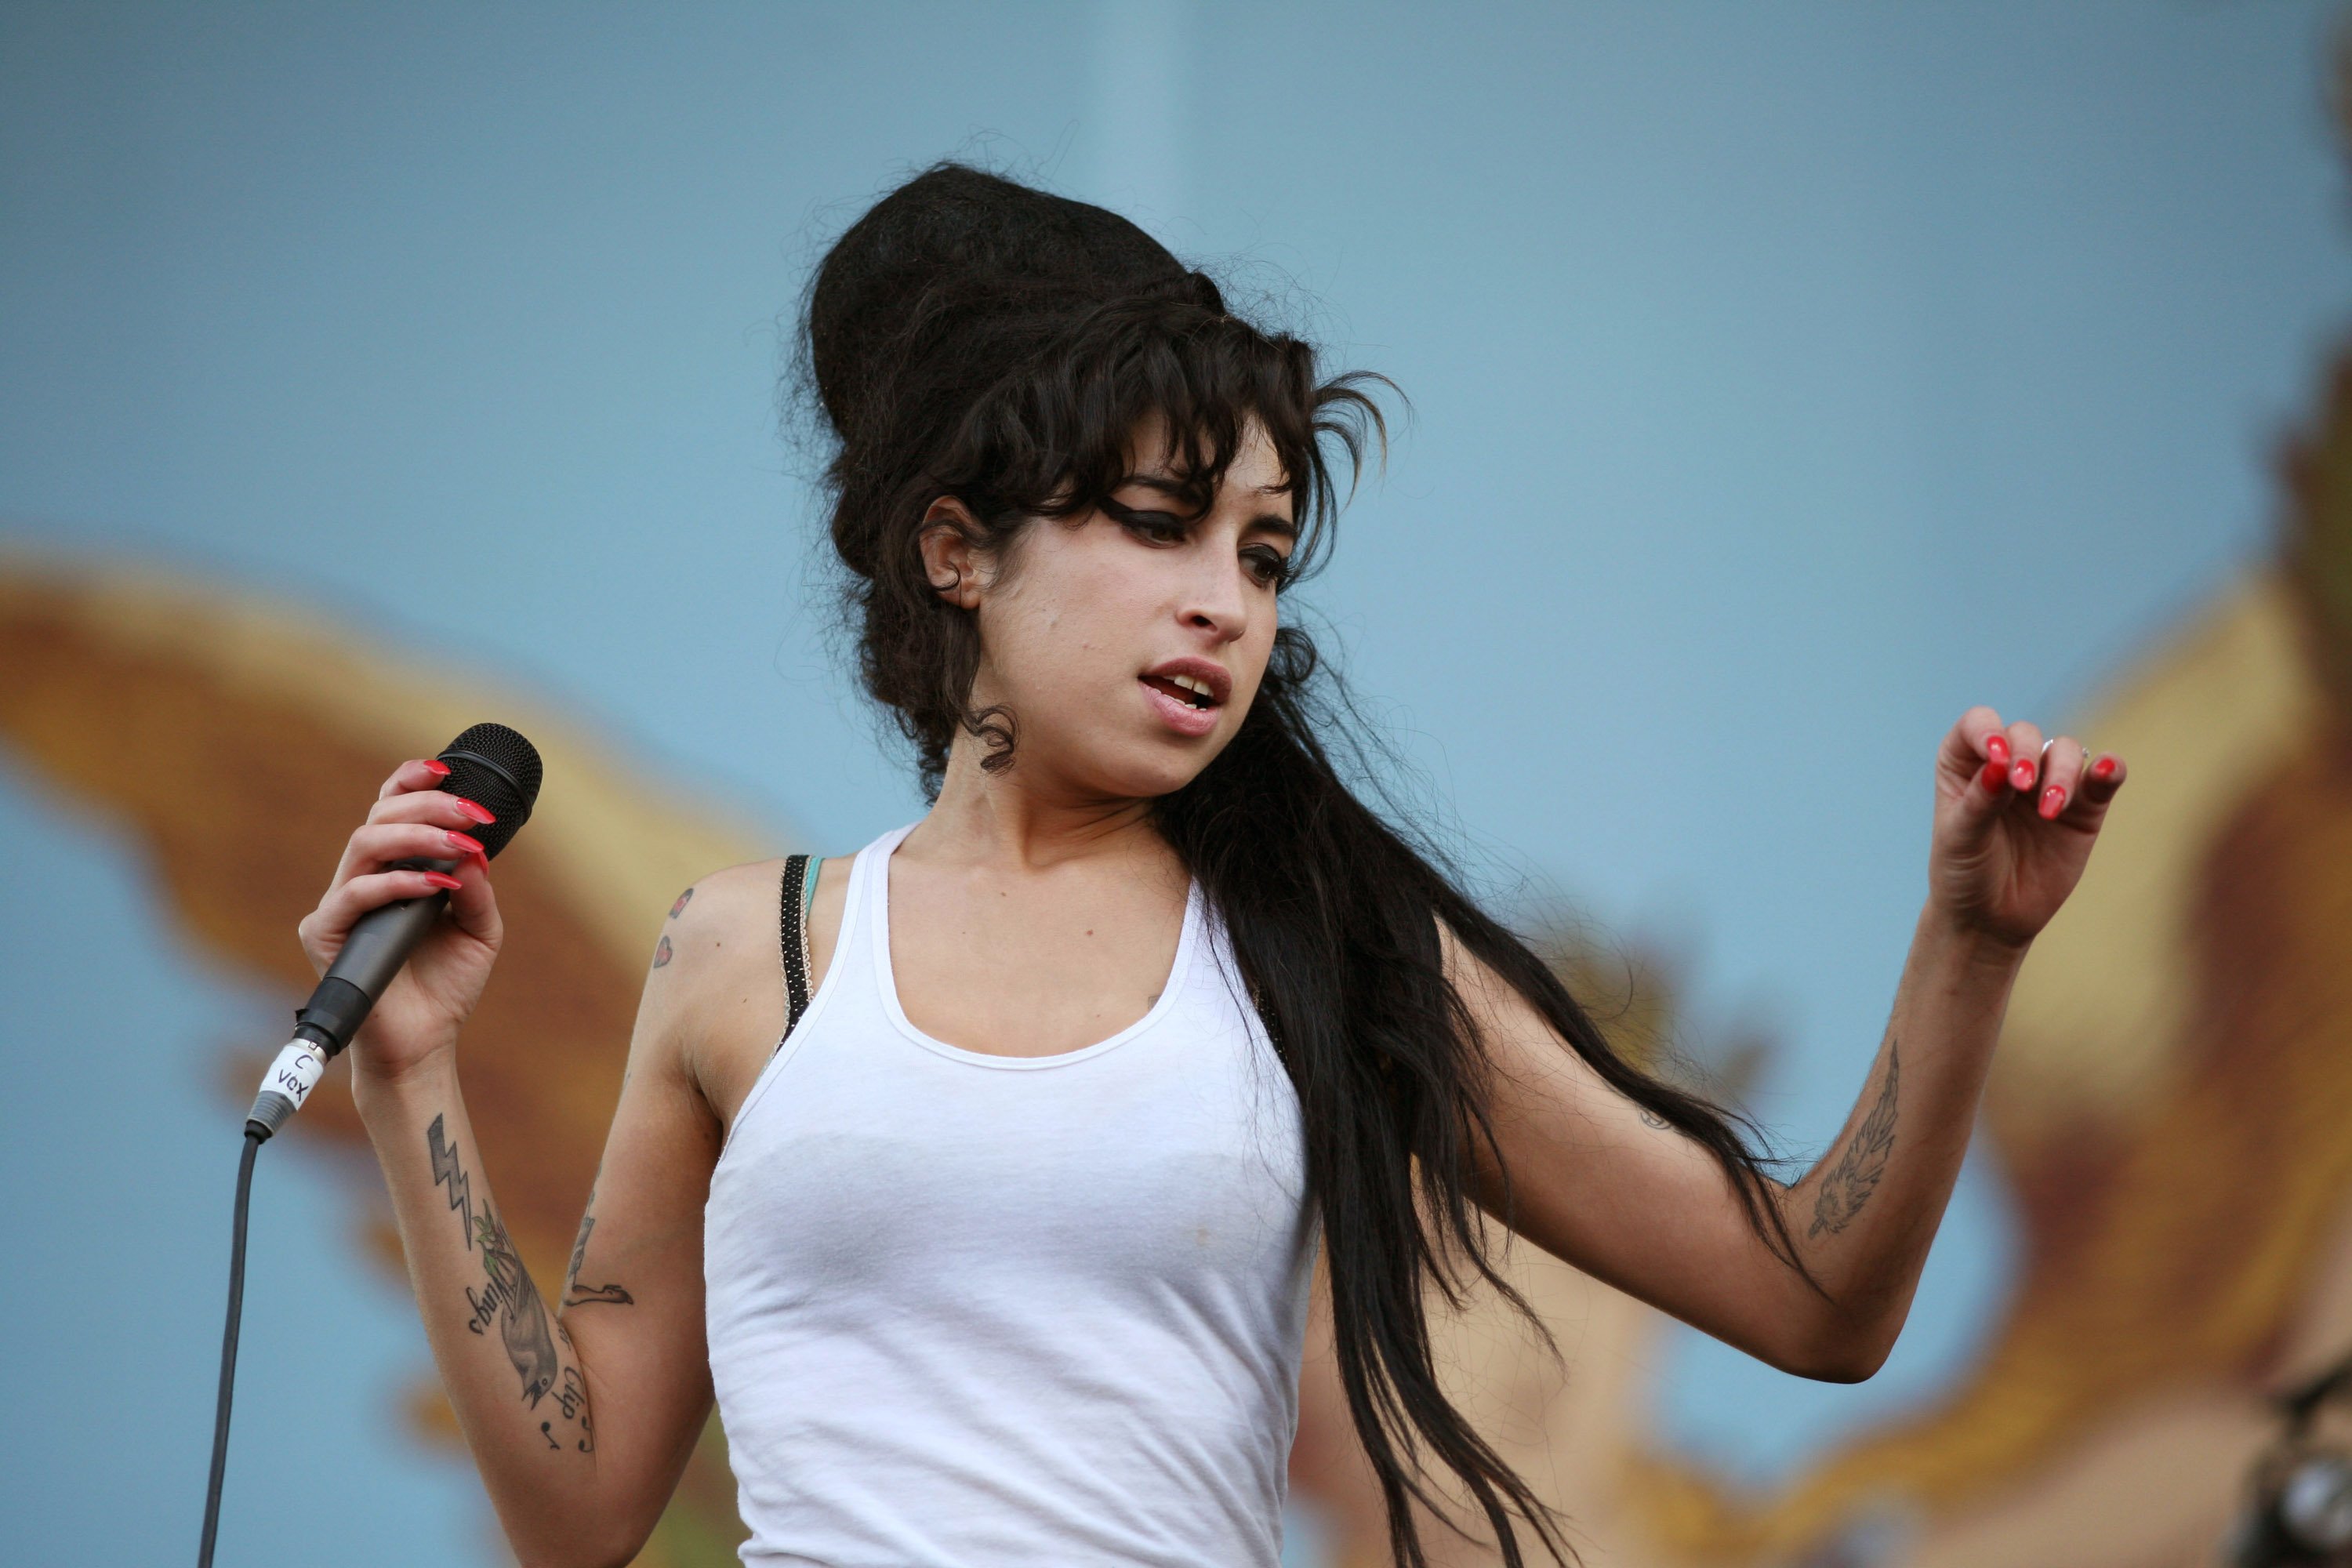 Amy Winehouse während des Isle of Wight Festivals - Tag 2 im Seaclose Park in Newport, Isle of Wight, Großbritannien. | Quelle: Getty Images